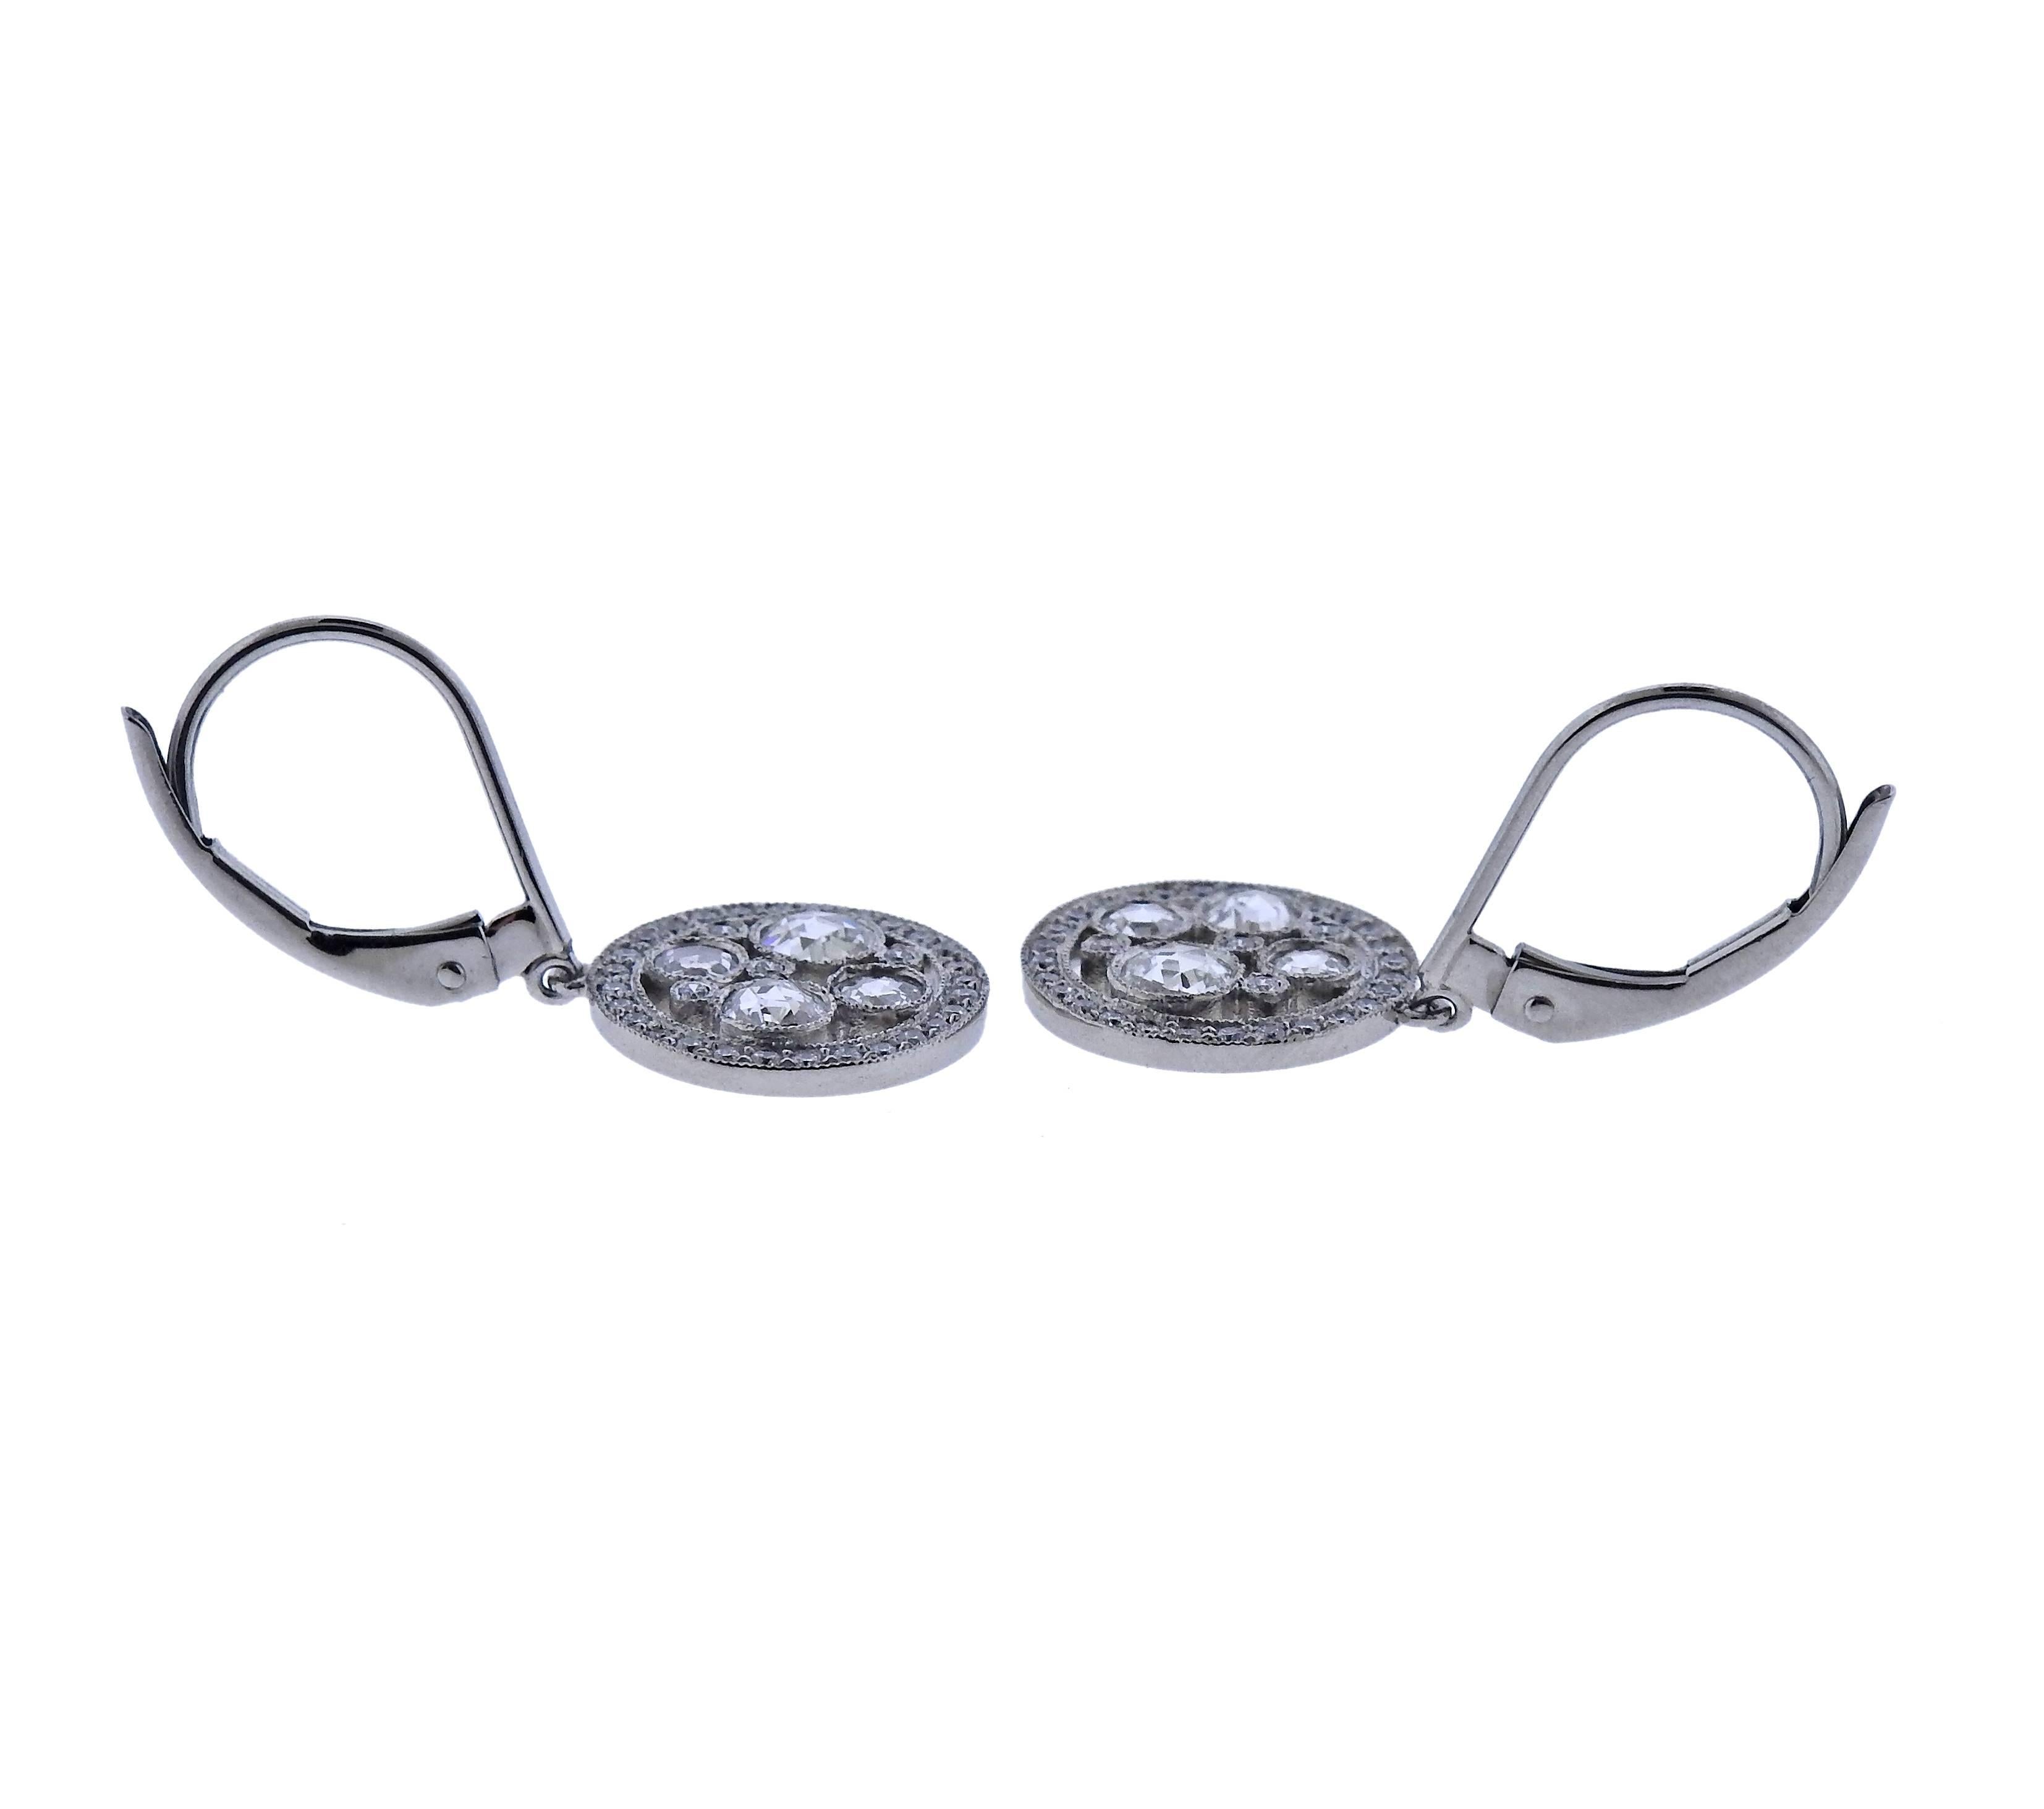 Pair of delicate Cobblestone platinum earrings, set with a total of 0.22ctw in round and rose cut diamonds. Crafted by Tiffany & Co. Earrings are 25mm long with wire, bottoms are 11mm in diameter, weight is 3.9 grams. Marked T & Co, pt950.